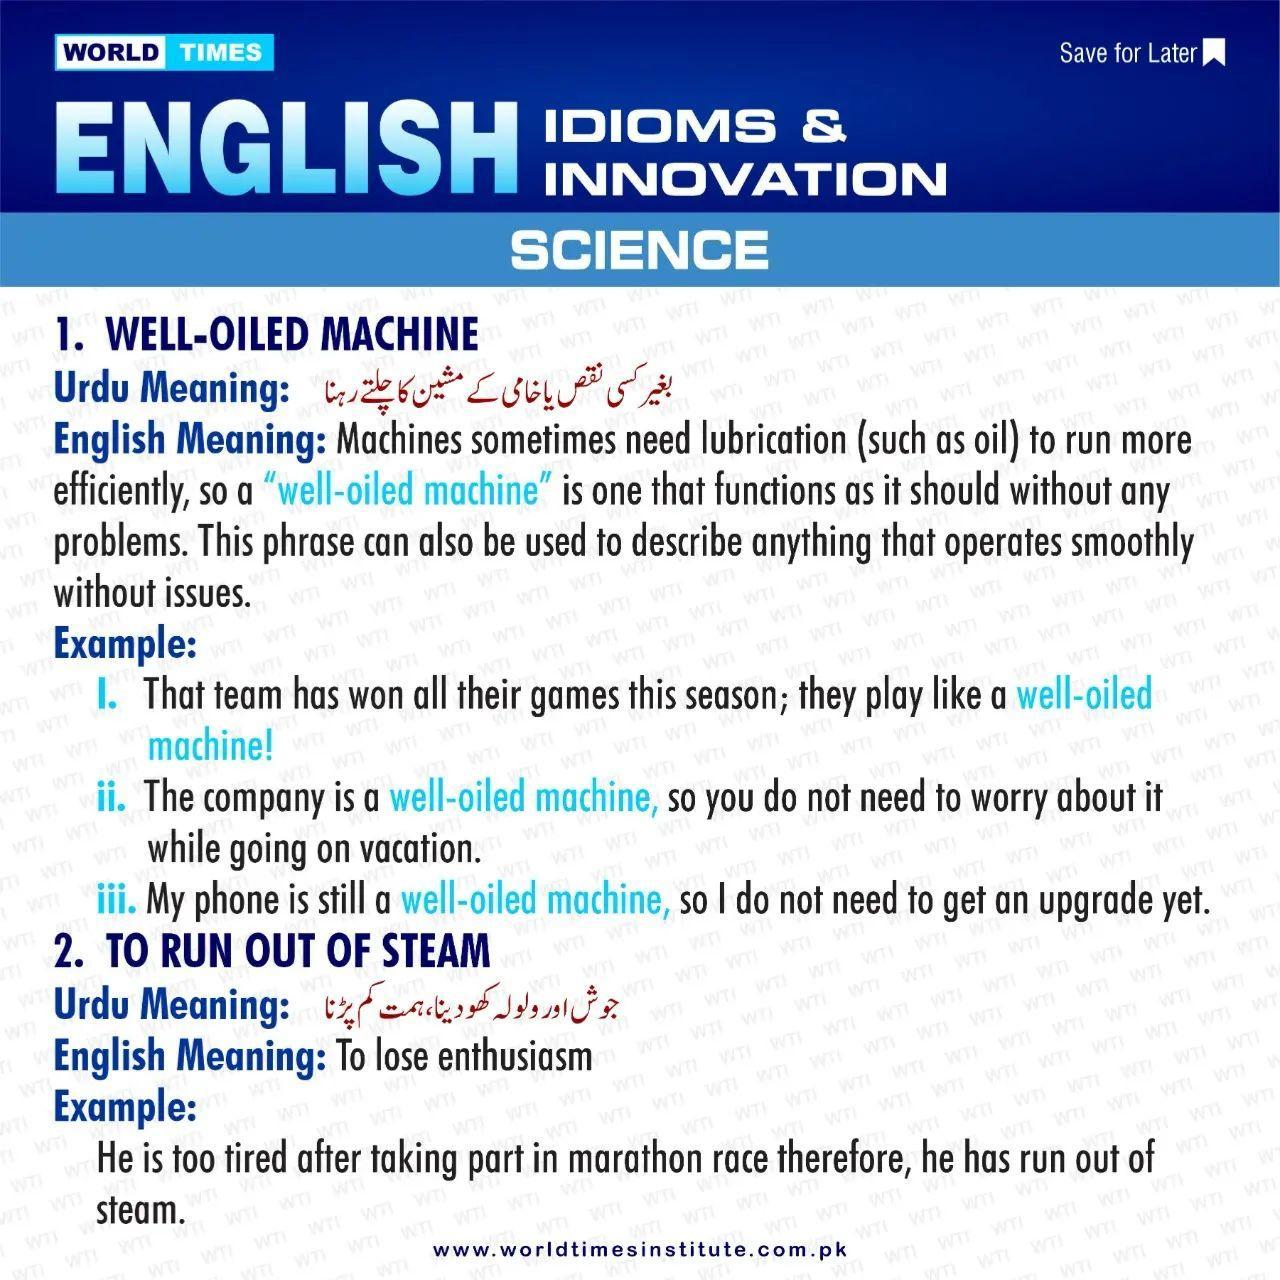 You are currently viewing English Idioms & Innovation 23-06-22